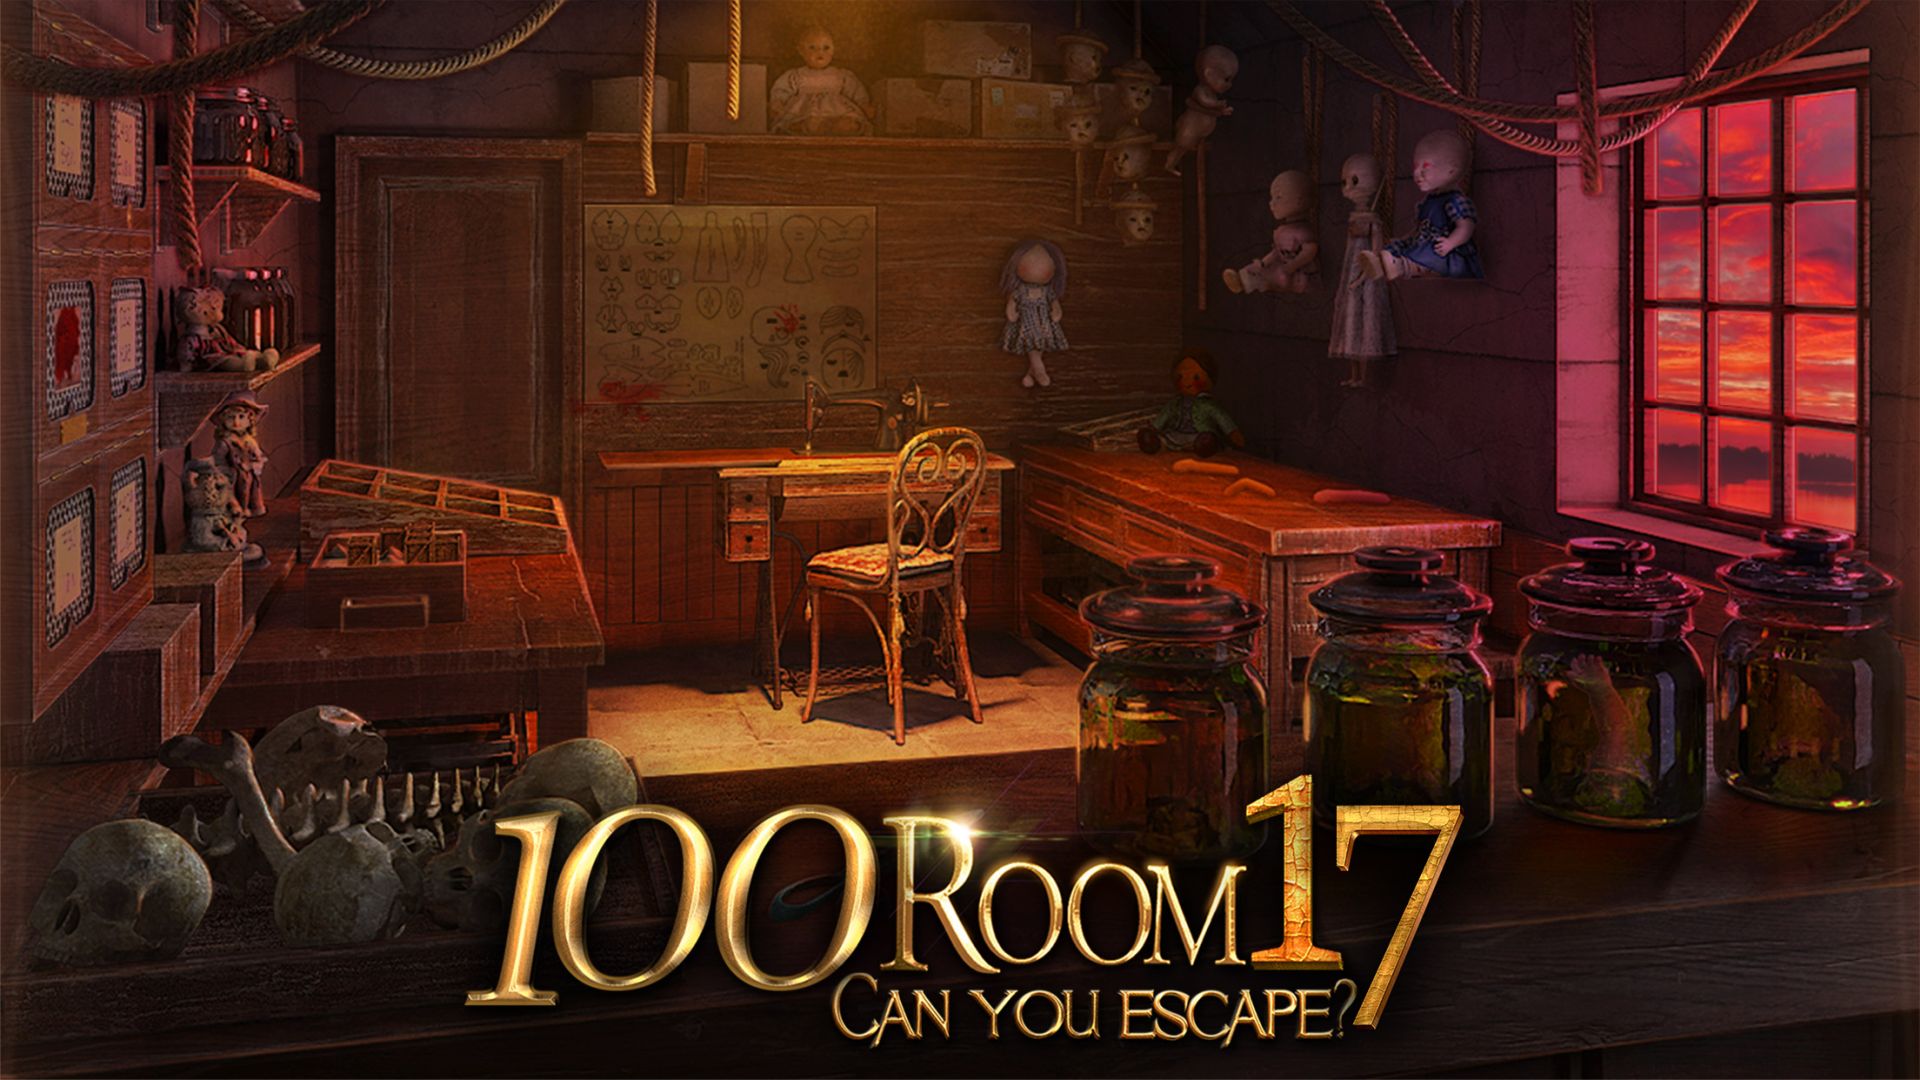 Can you Escape 100 Room 17 featured